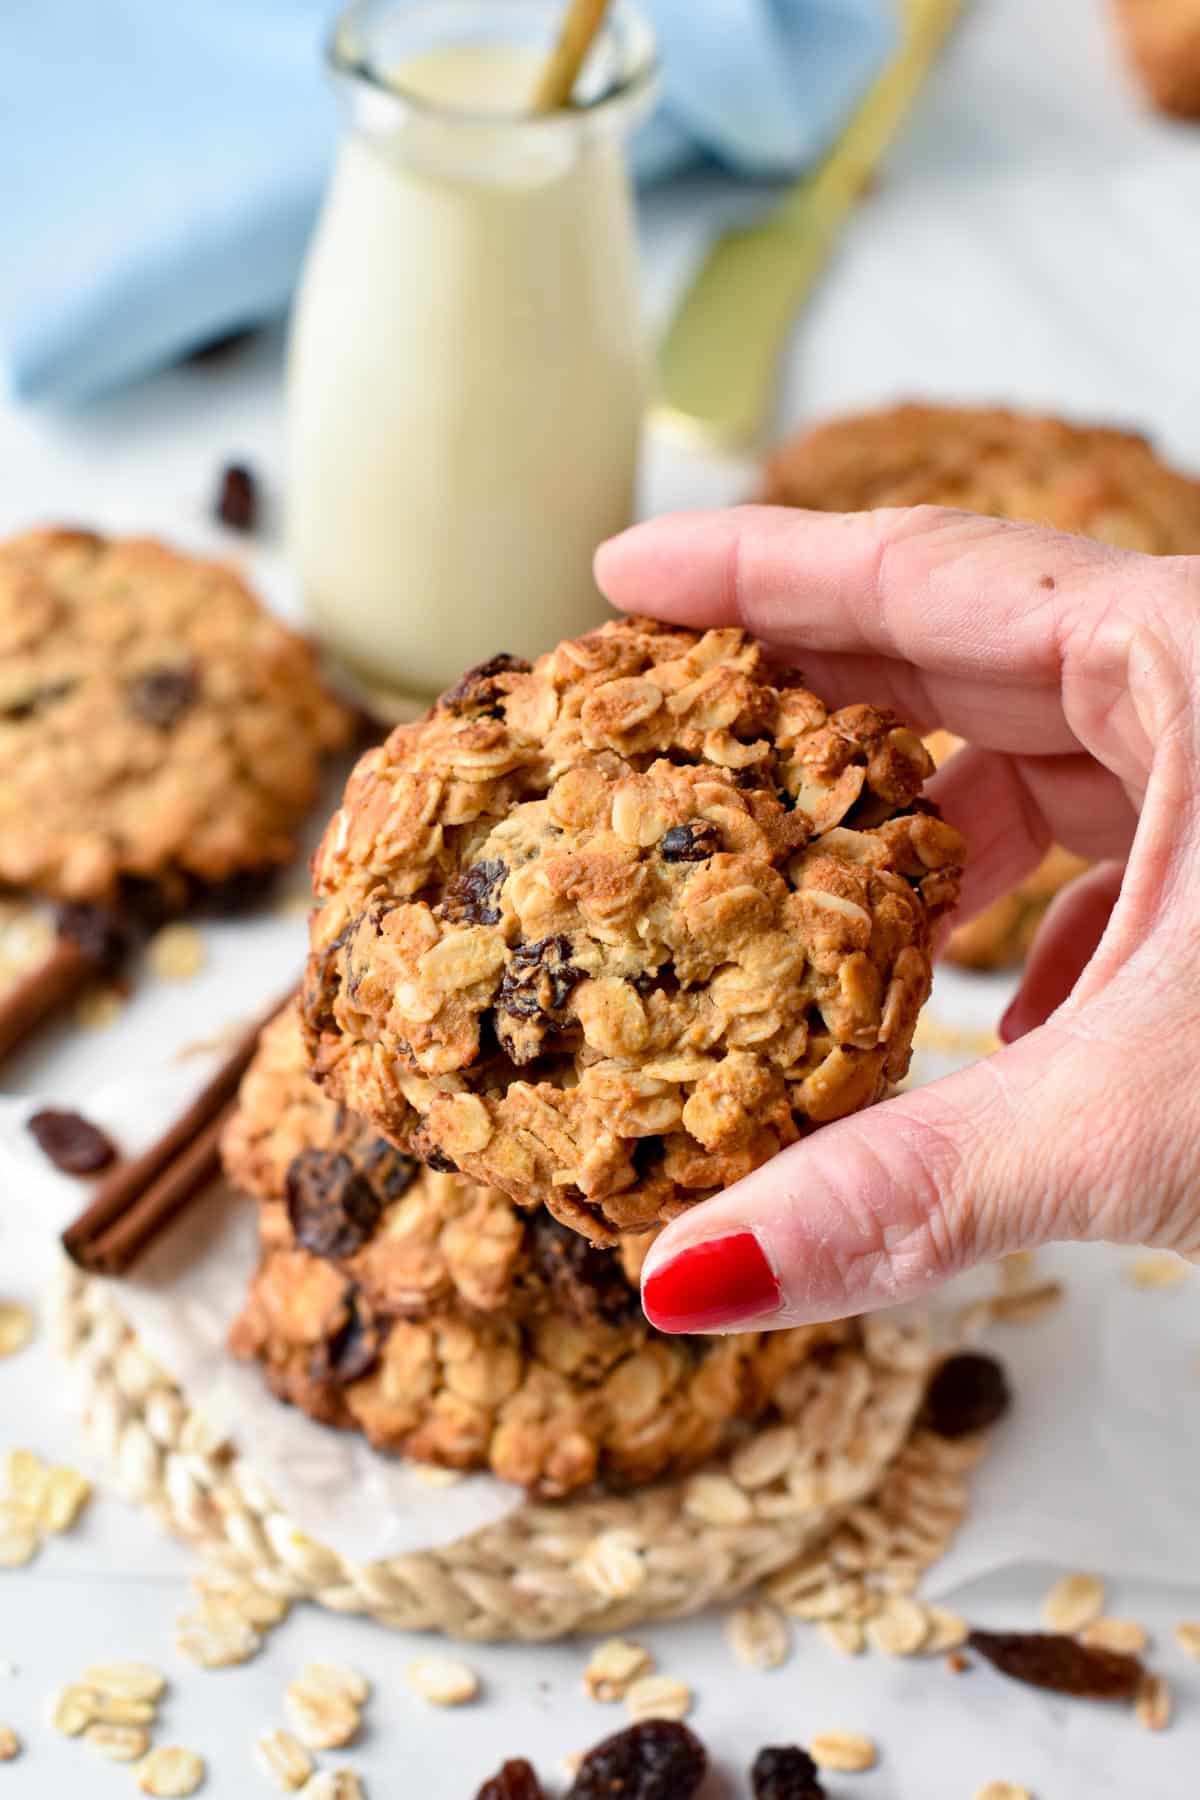 These Oatmeal Raisin Protein Cookies are the easiest high-protein breakfast or post-workout cookies to fuel you up with 14 grams of plant-based proteins per cookie.